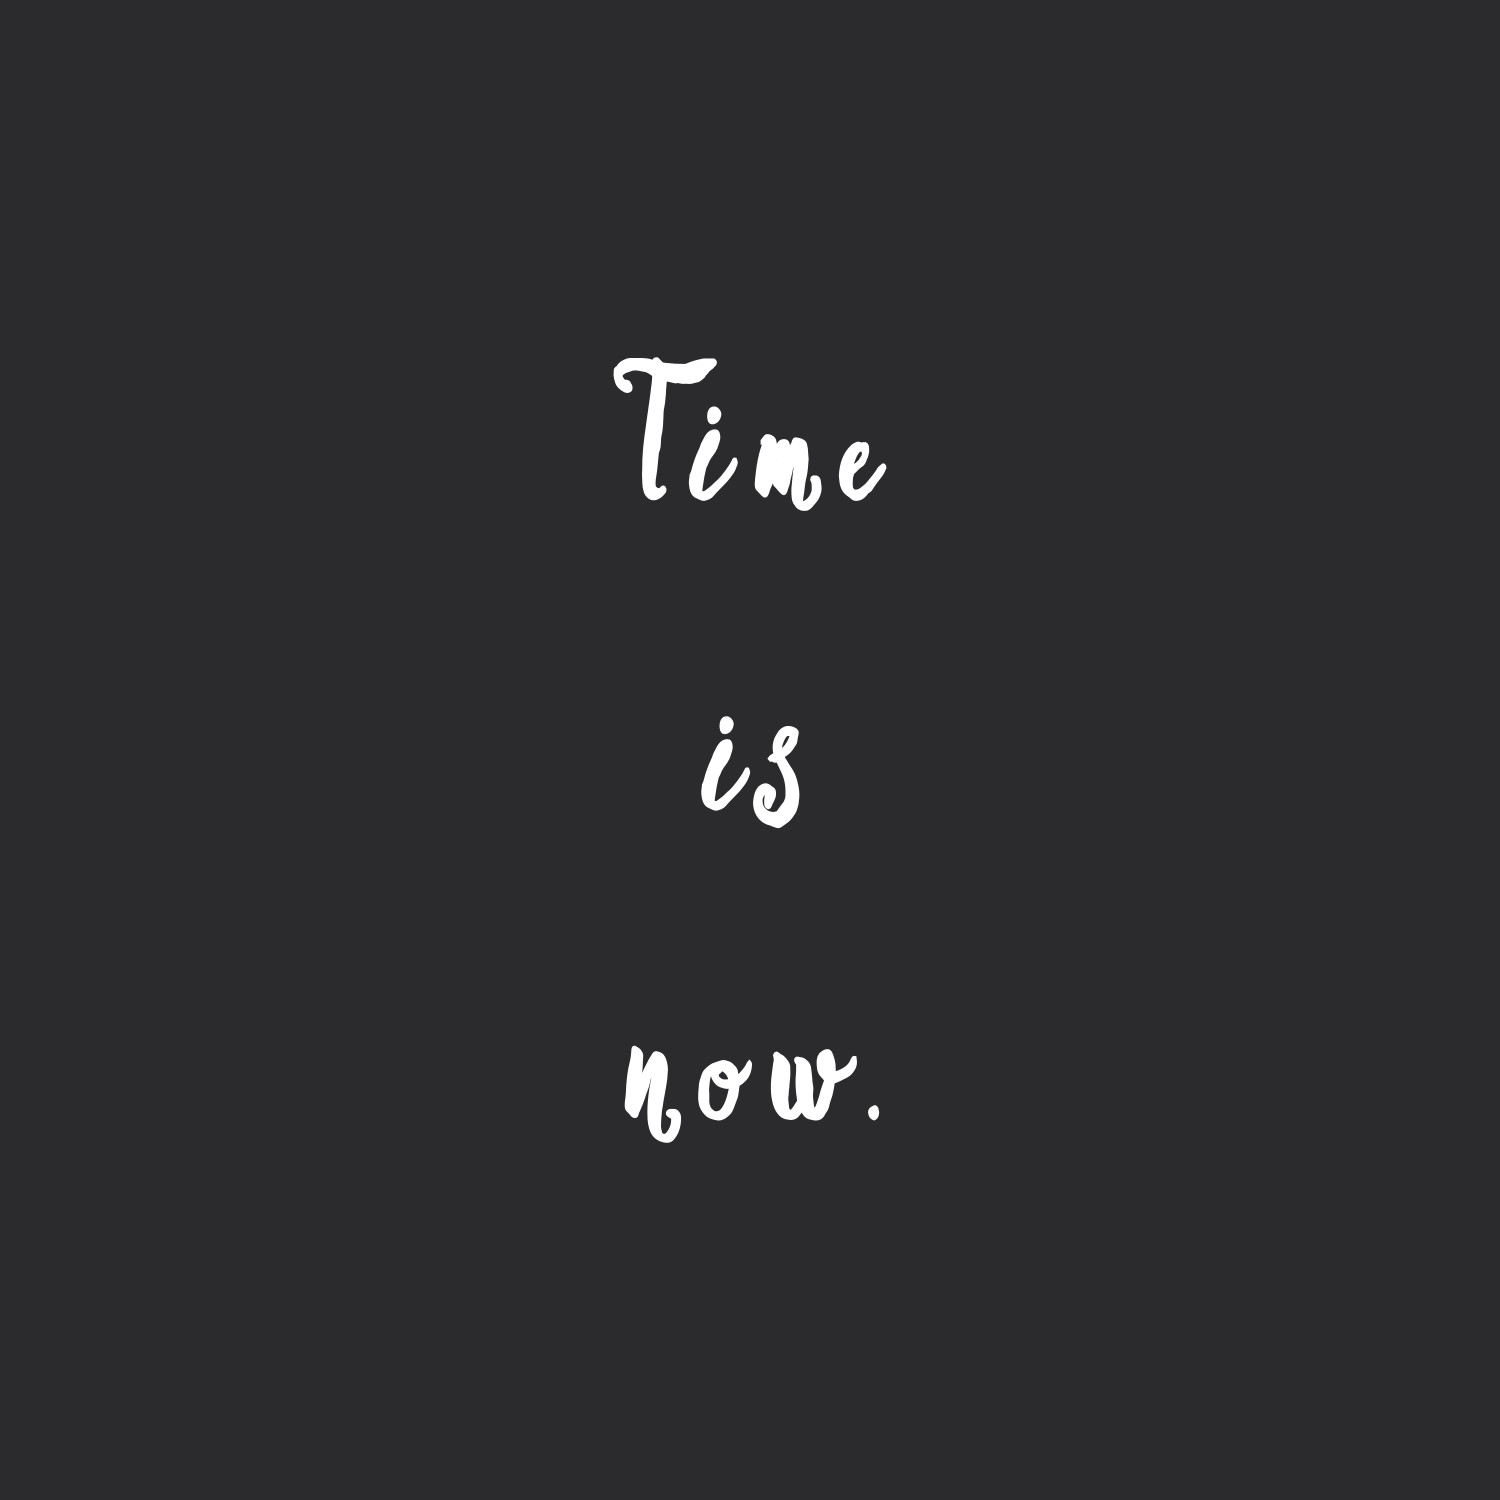 Time is now! Browse our collection of motivational health and fitness quotes and get instant exercise and healthy eating inspiration. Stay focused and get fit, healthy and happy! https://www.spotebi.com/workout-motivation/time-is-now/